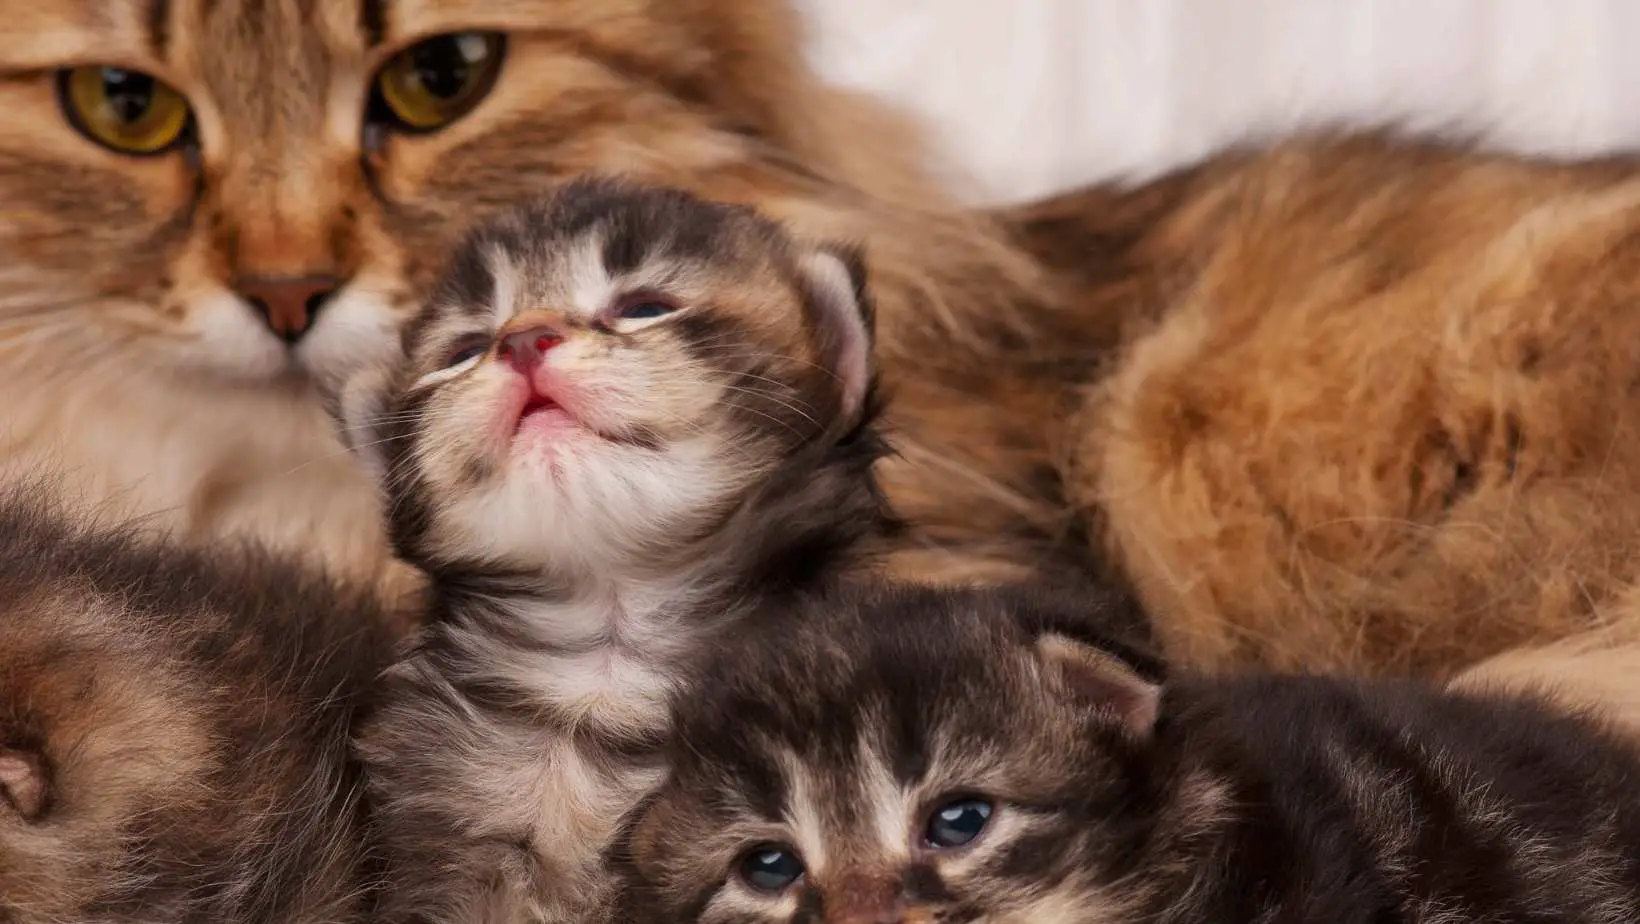 My cat just had kittens what do I do? 6 Tips for Caring Momma Cats and Kittens